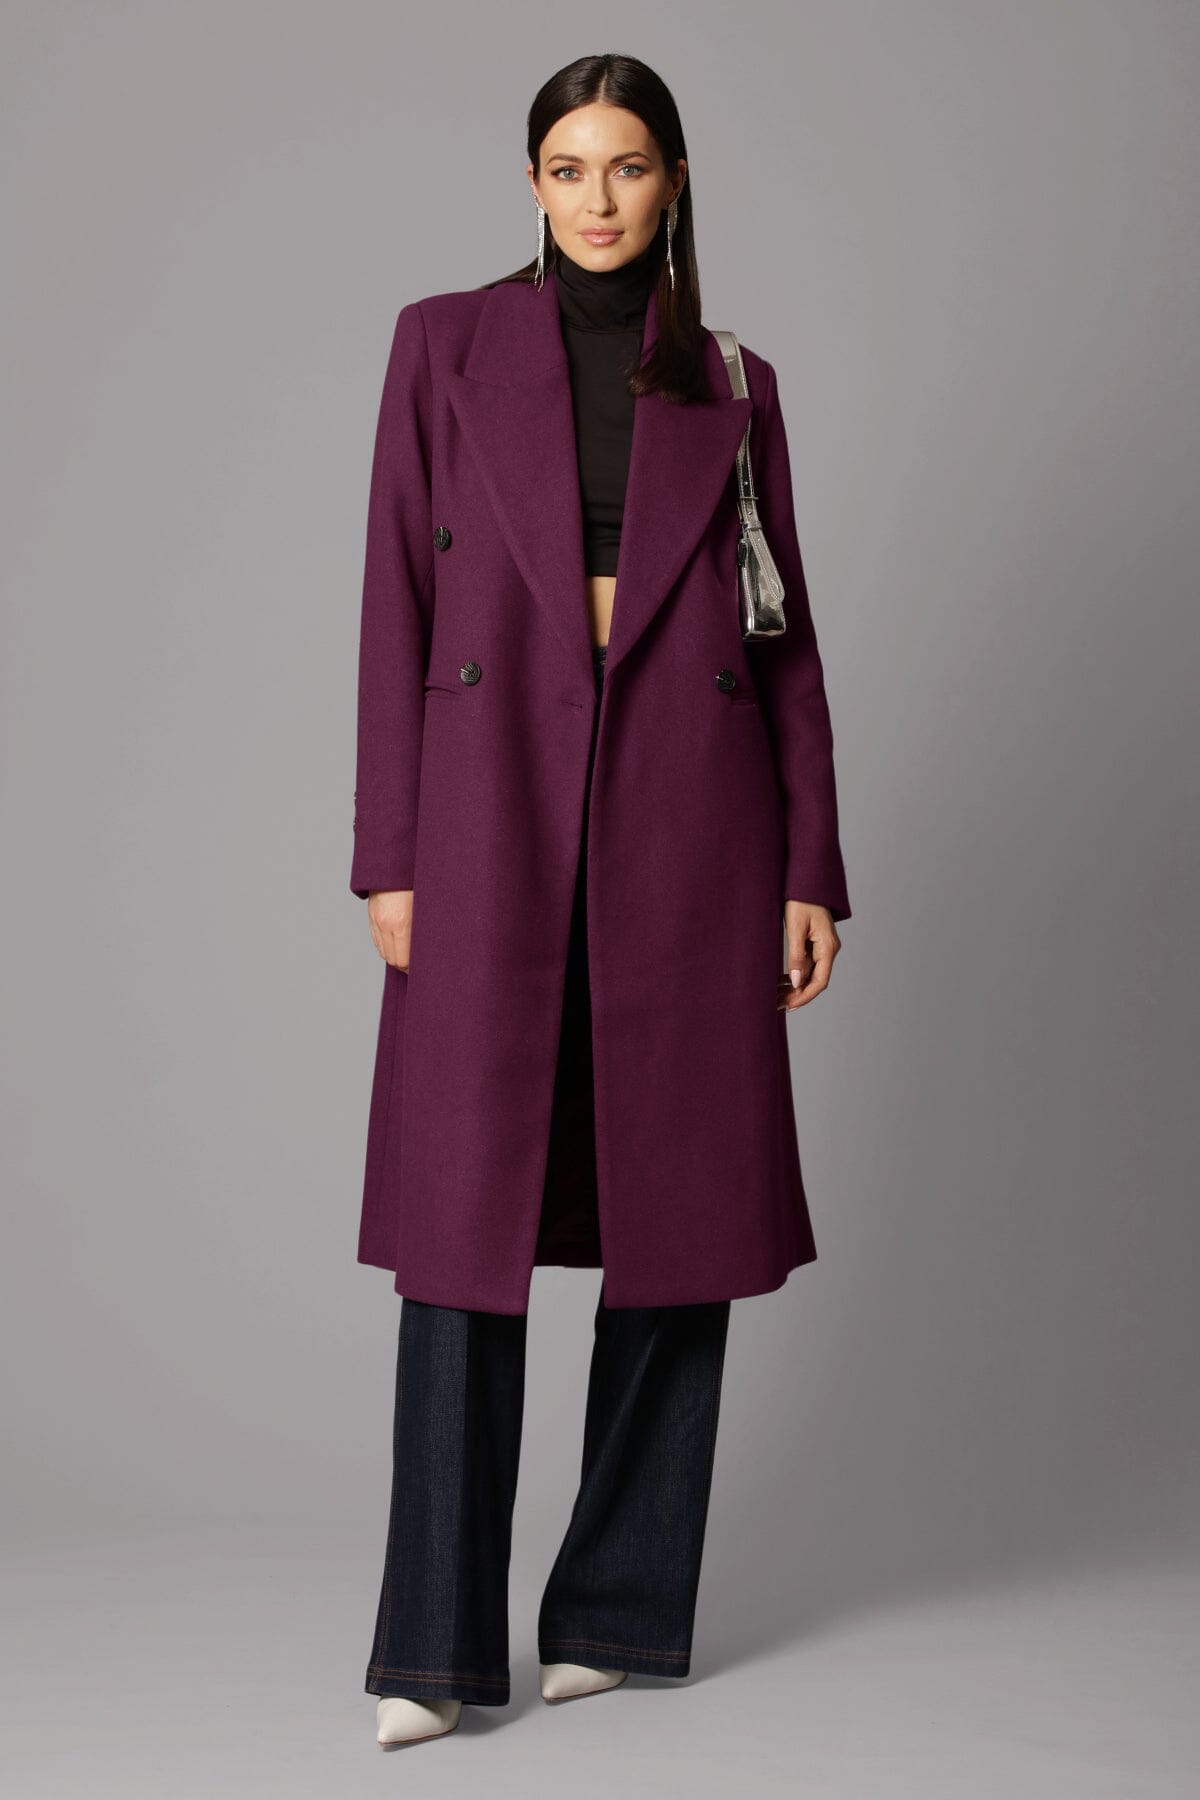 Designer fashion aubergine purple tailored double-breasted long coat by Avec Les Filles Coats & Jackets